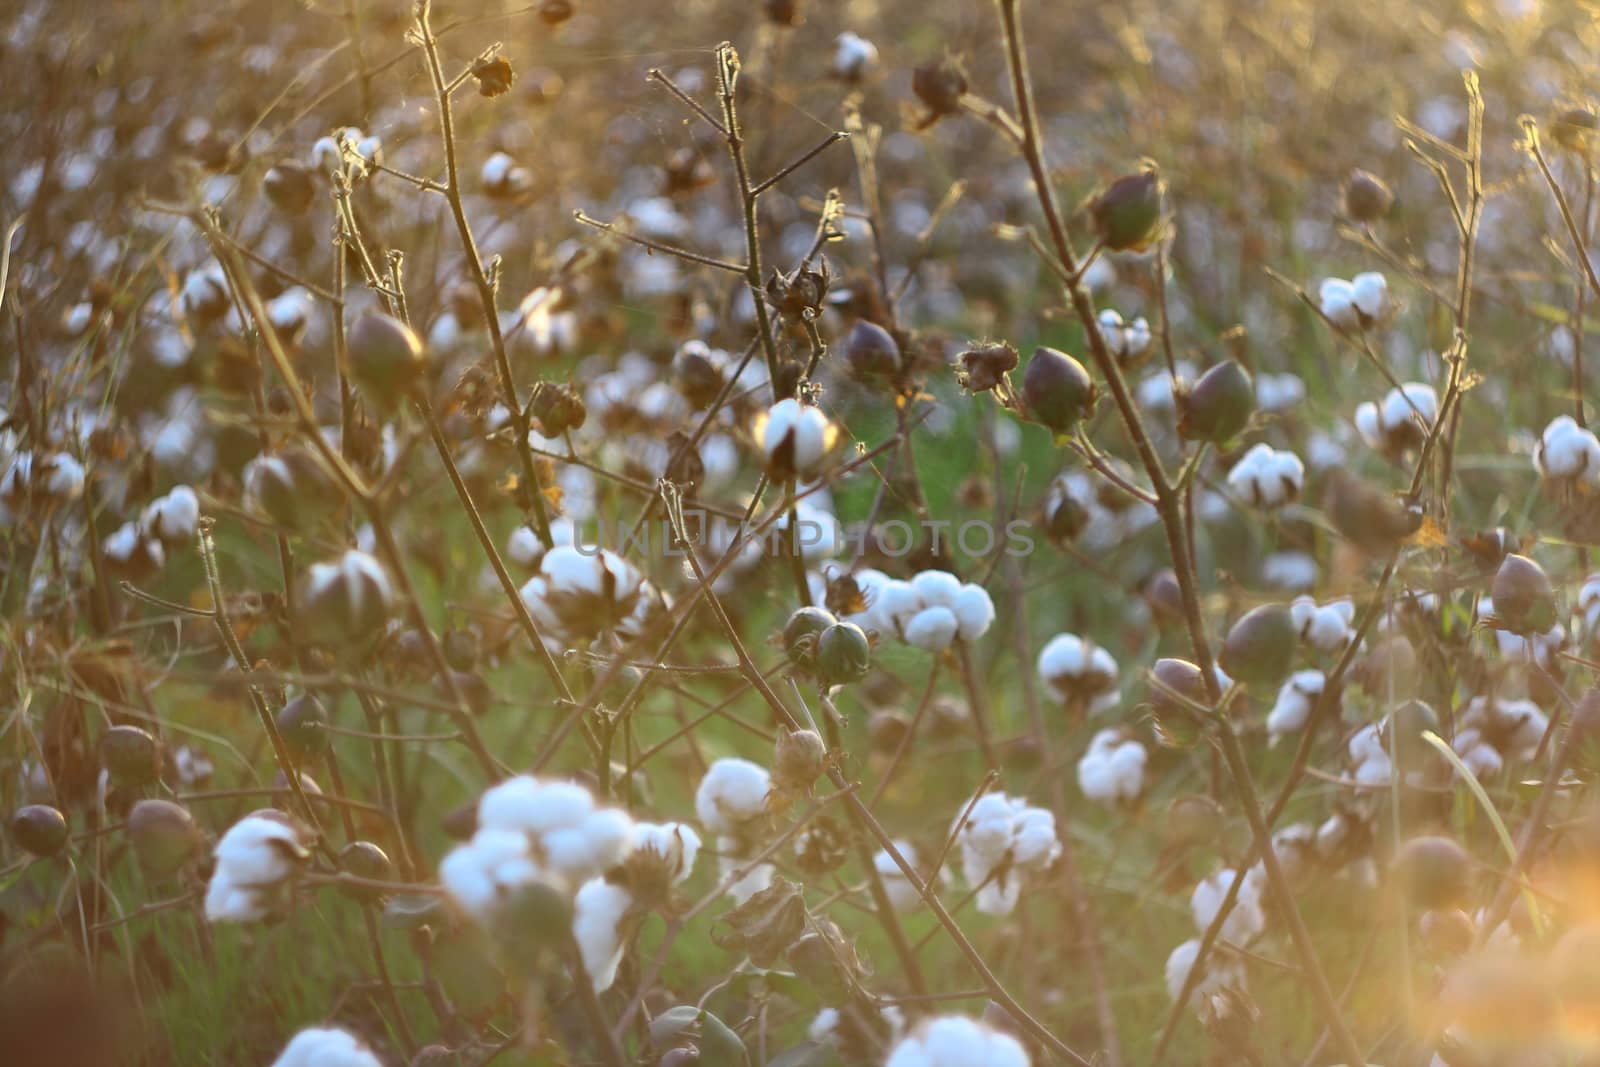 collecting cotton from field at sunset 